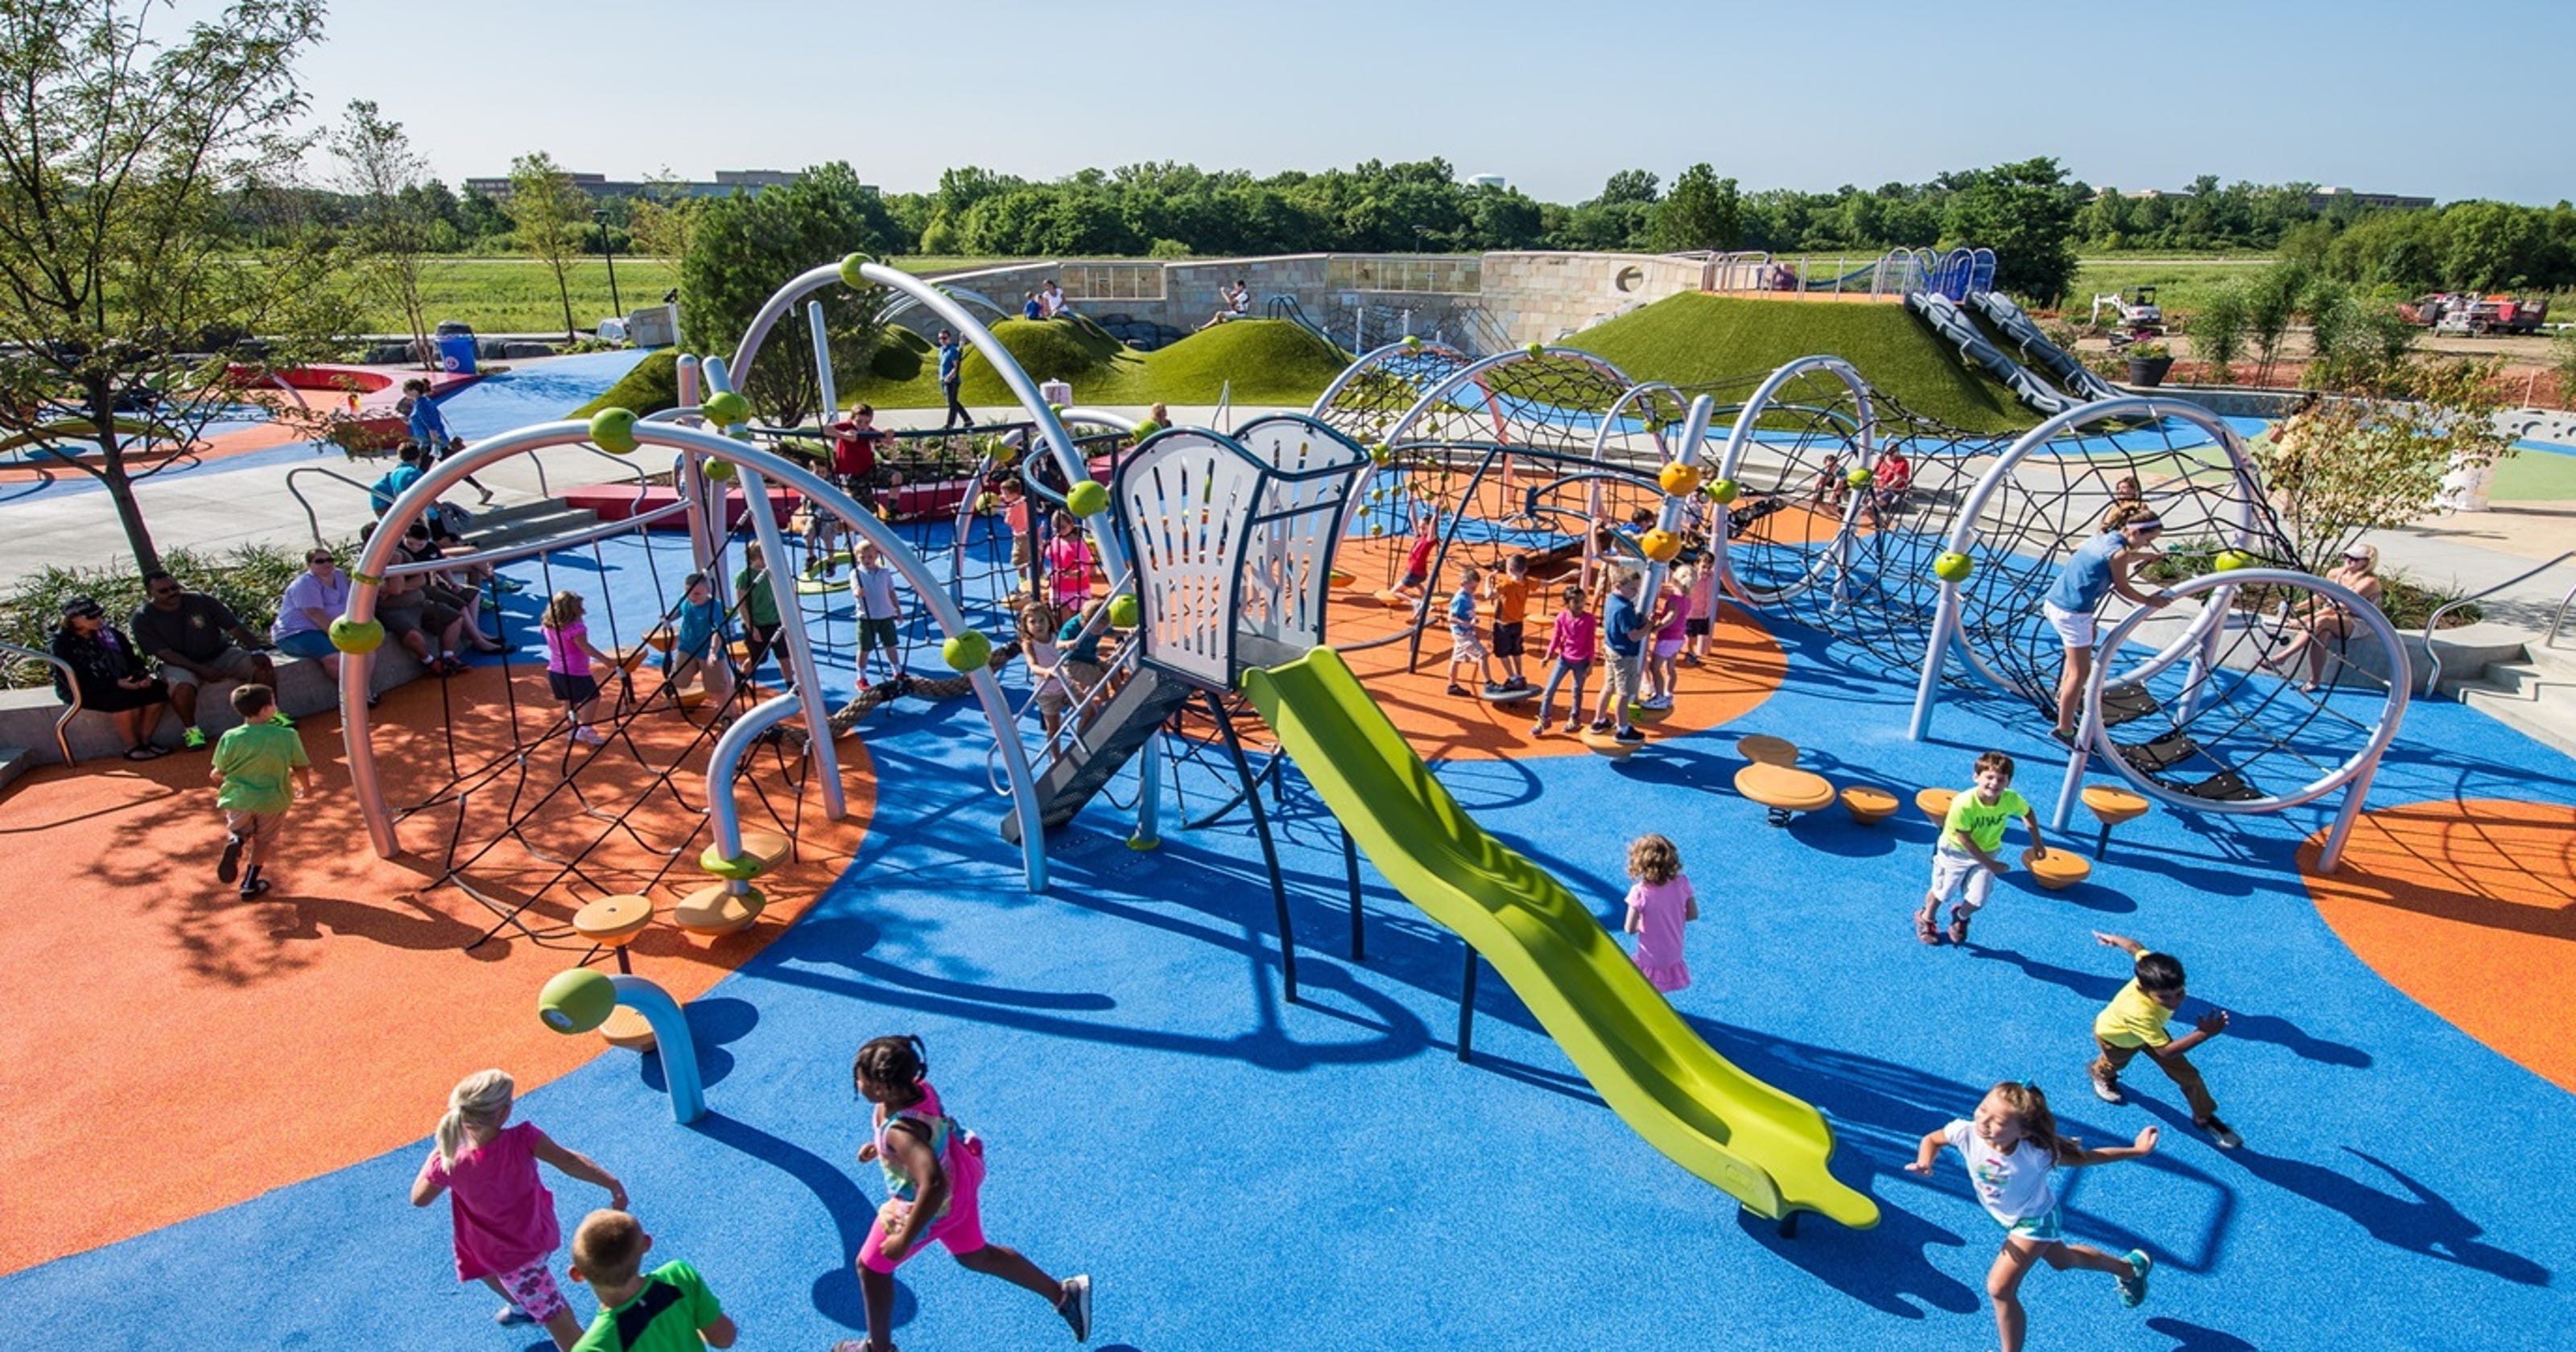 Blue Ash Summit Park receives award of excellence